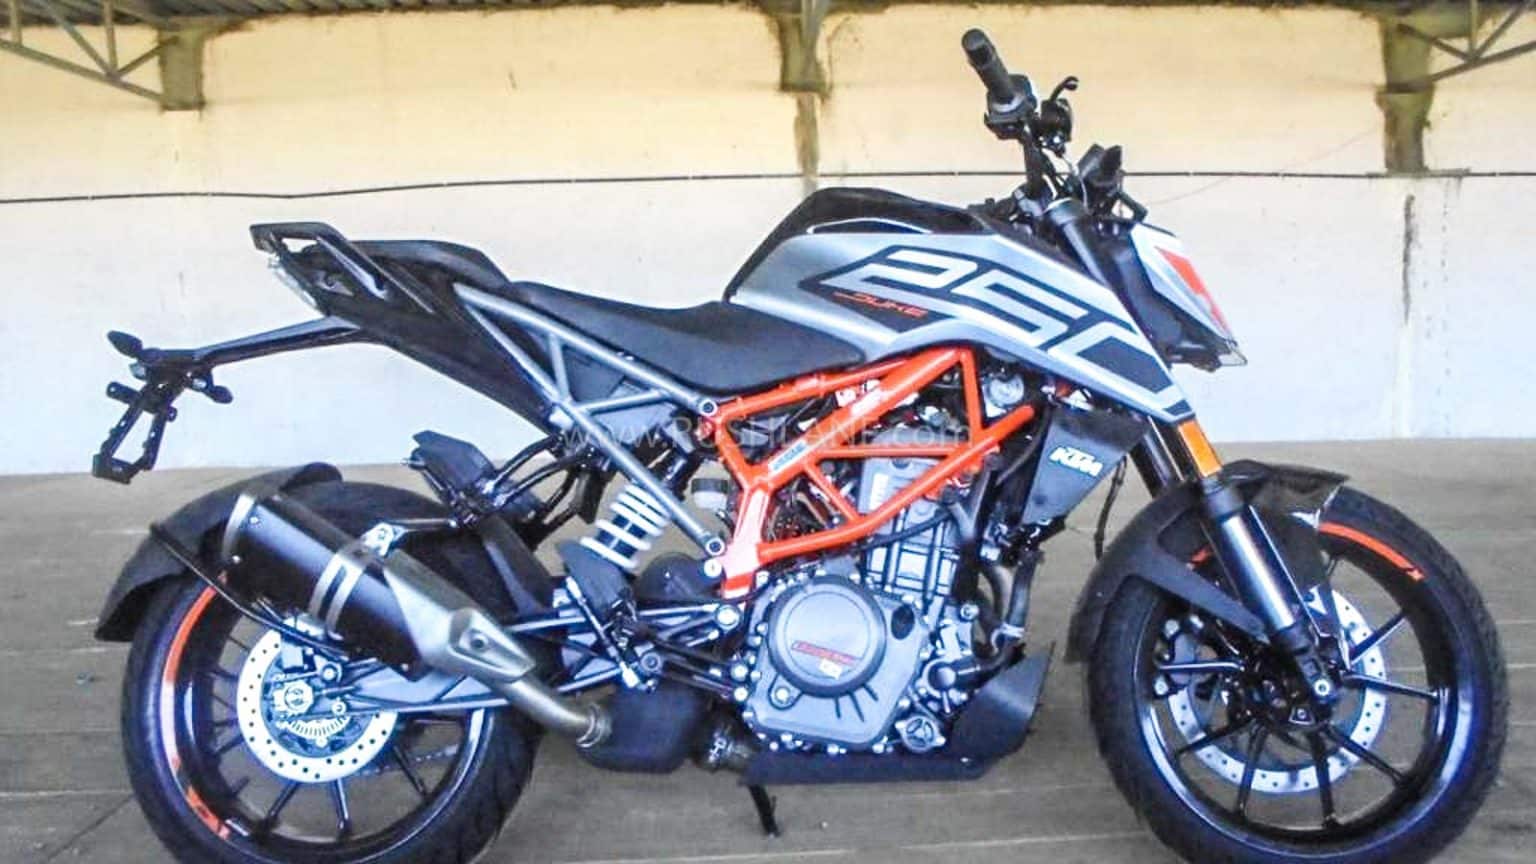 2020 Ktm 250 Duke With Updated Headlight To Cost Inr 2 09 Lakh Report